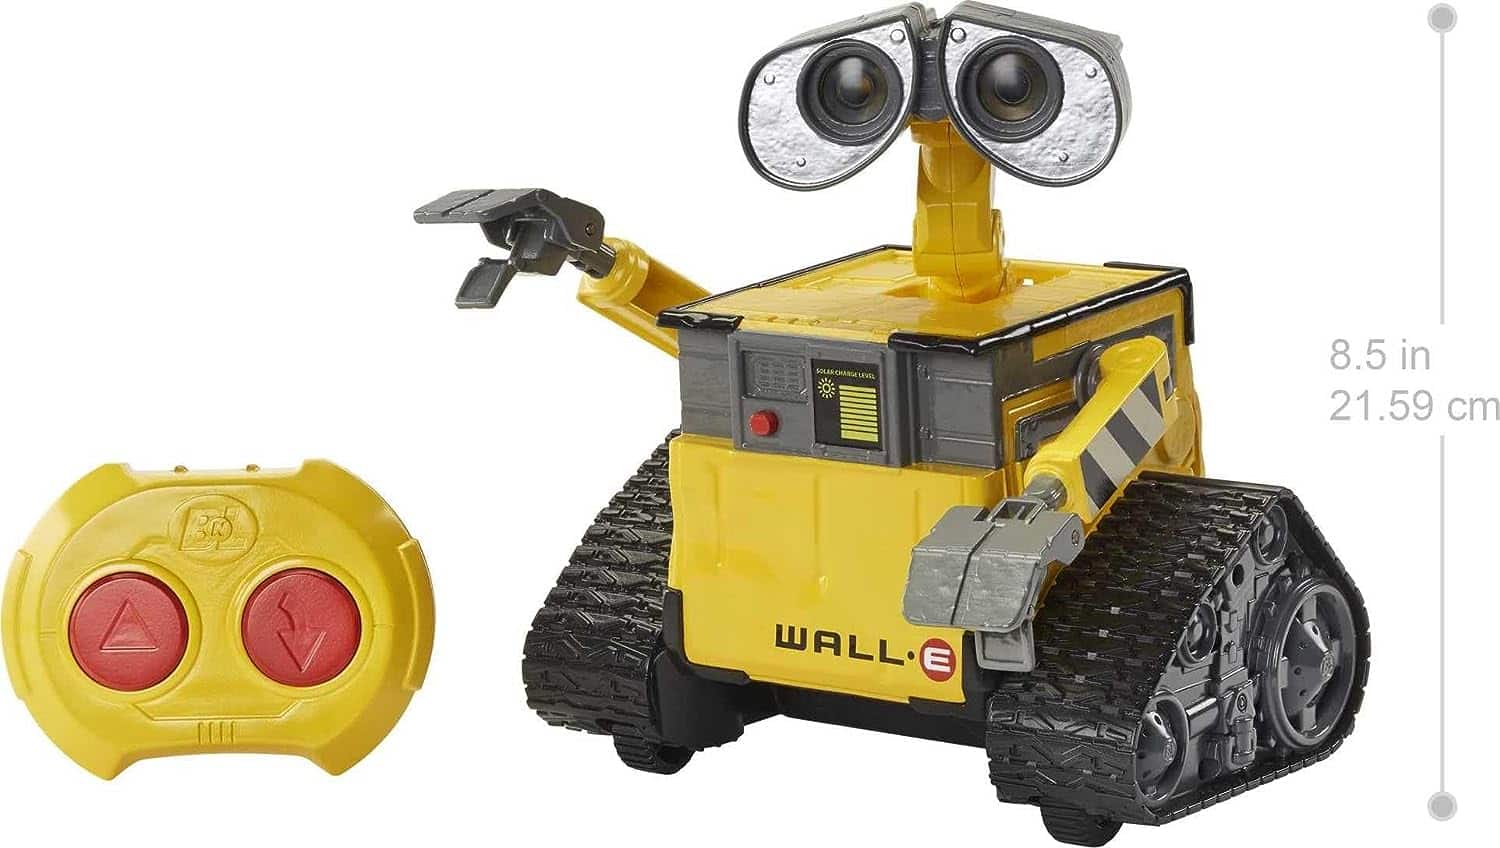 Disney and Pixar WALL-E Robot Toy: A Fun and Engaging Remote Control Figure for Kids